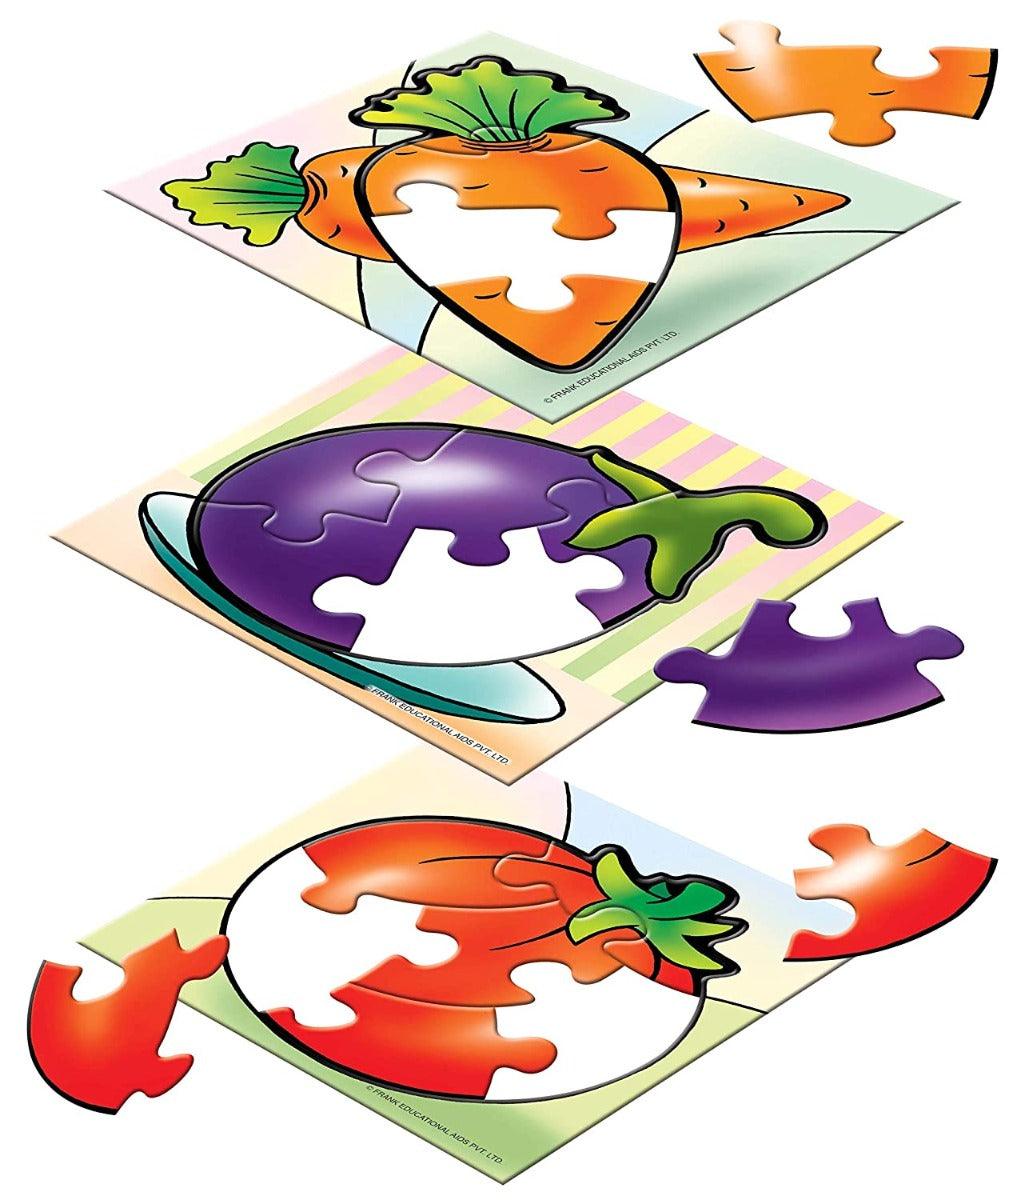 Frank My First Vegetables Puzzle For 3 Year Old Kids And Above